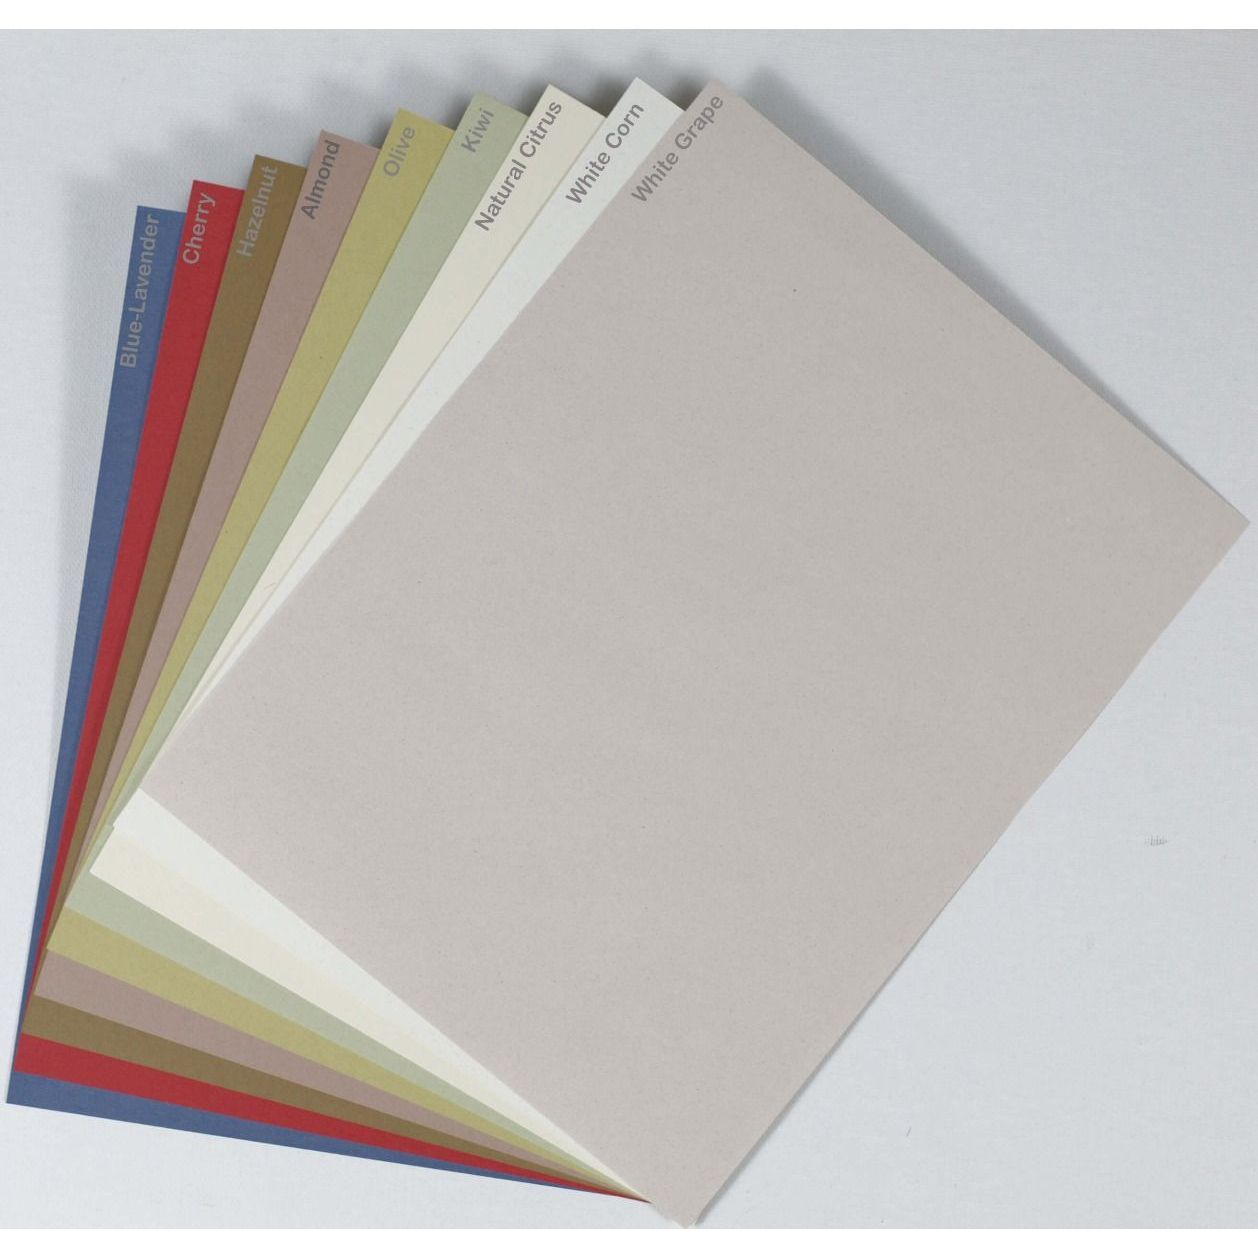 REMAKE Sand - 12X18 Paper 32/81lb Text (120gsm) - 200 PK -at PaperPapers